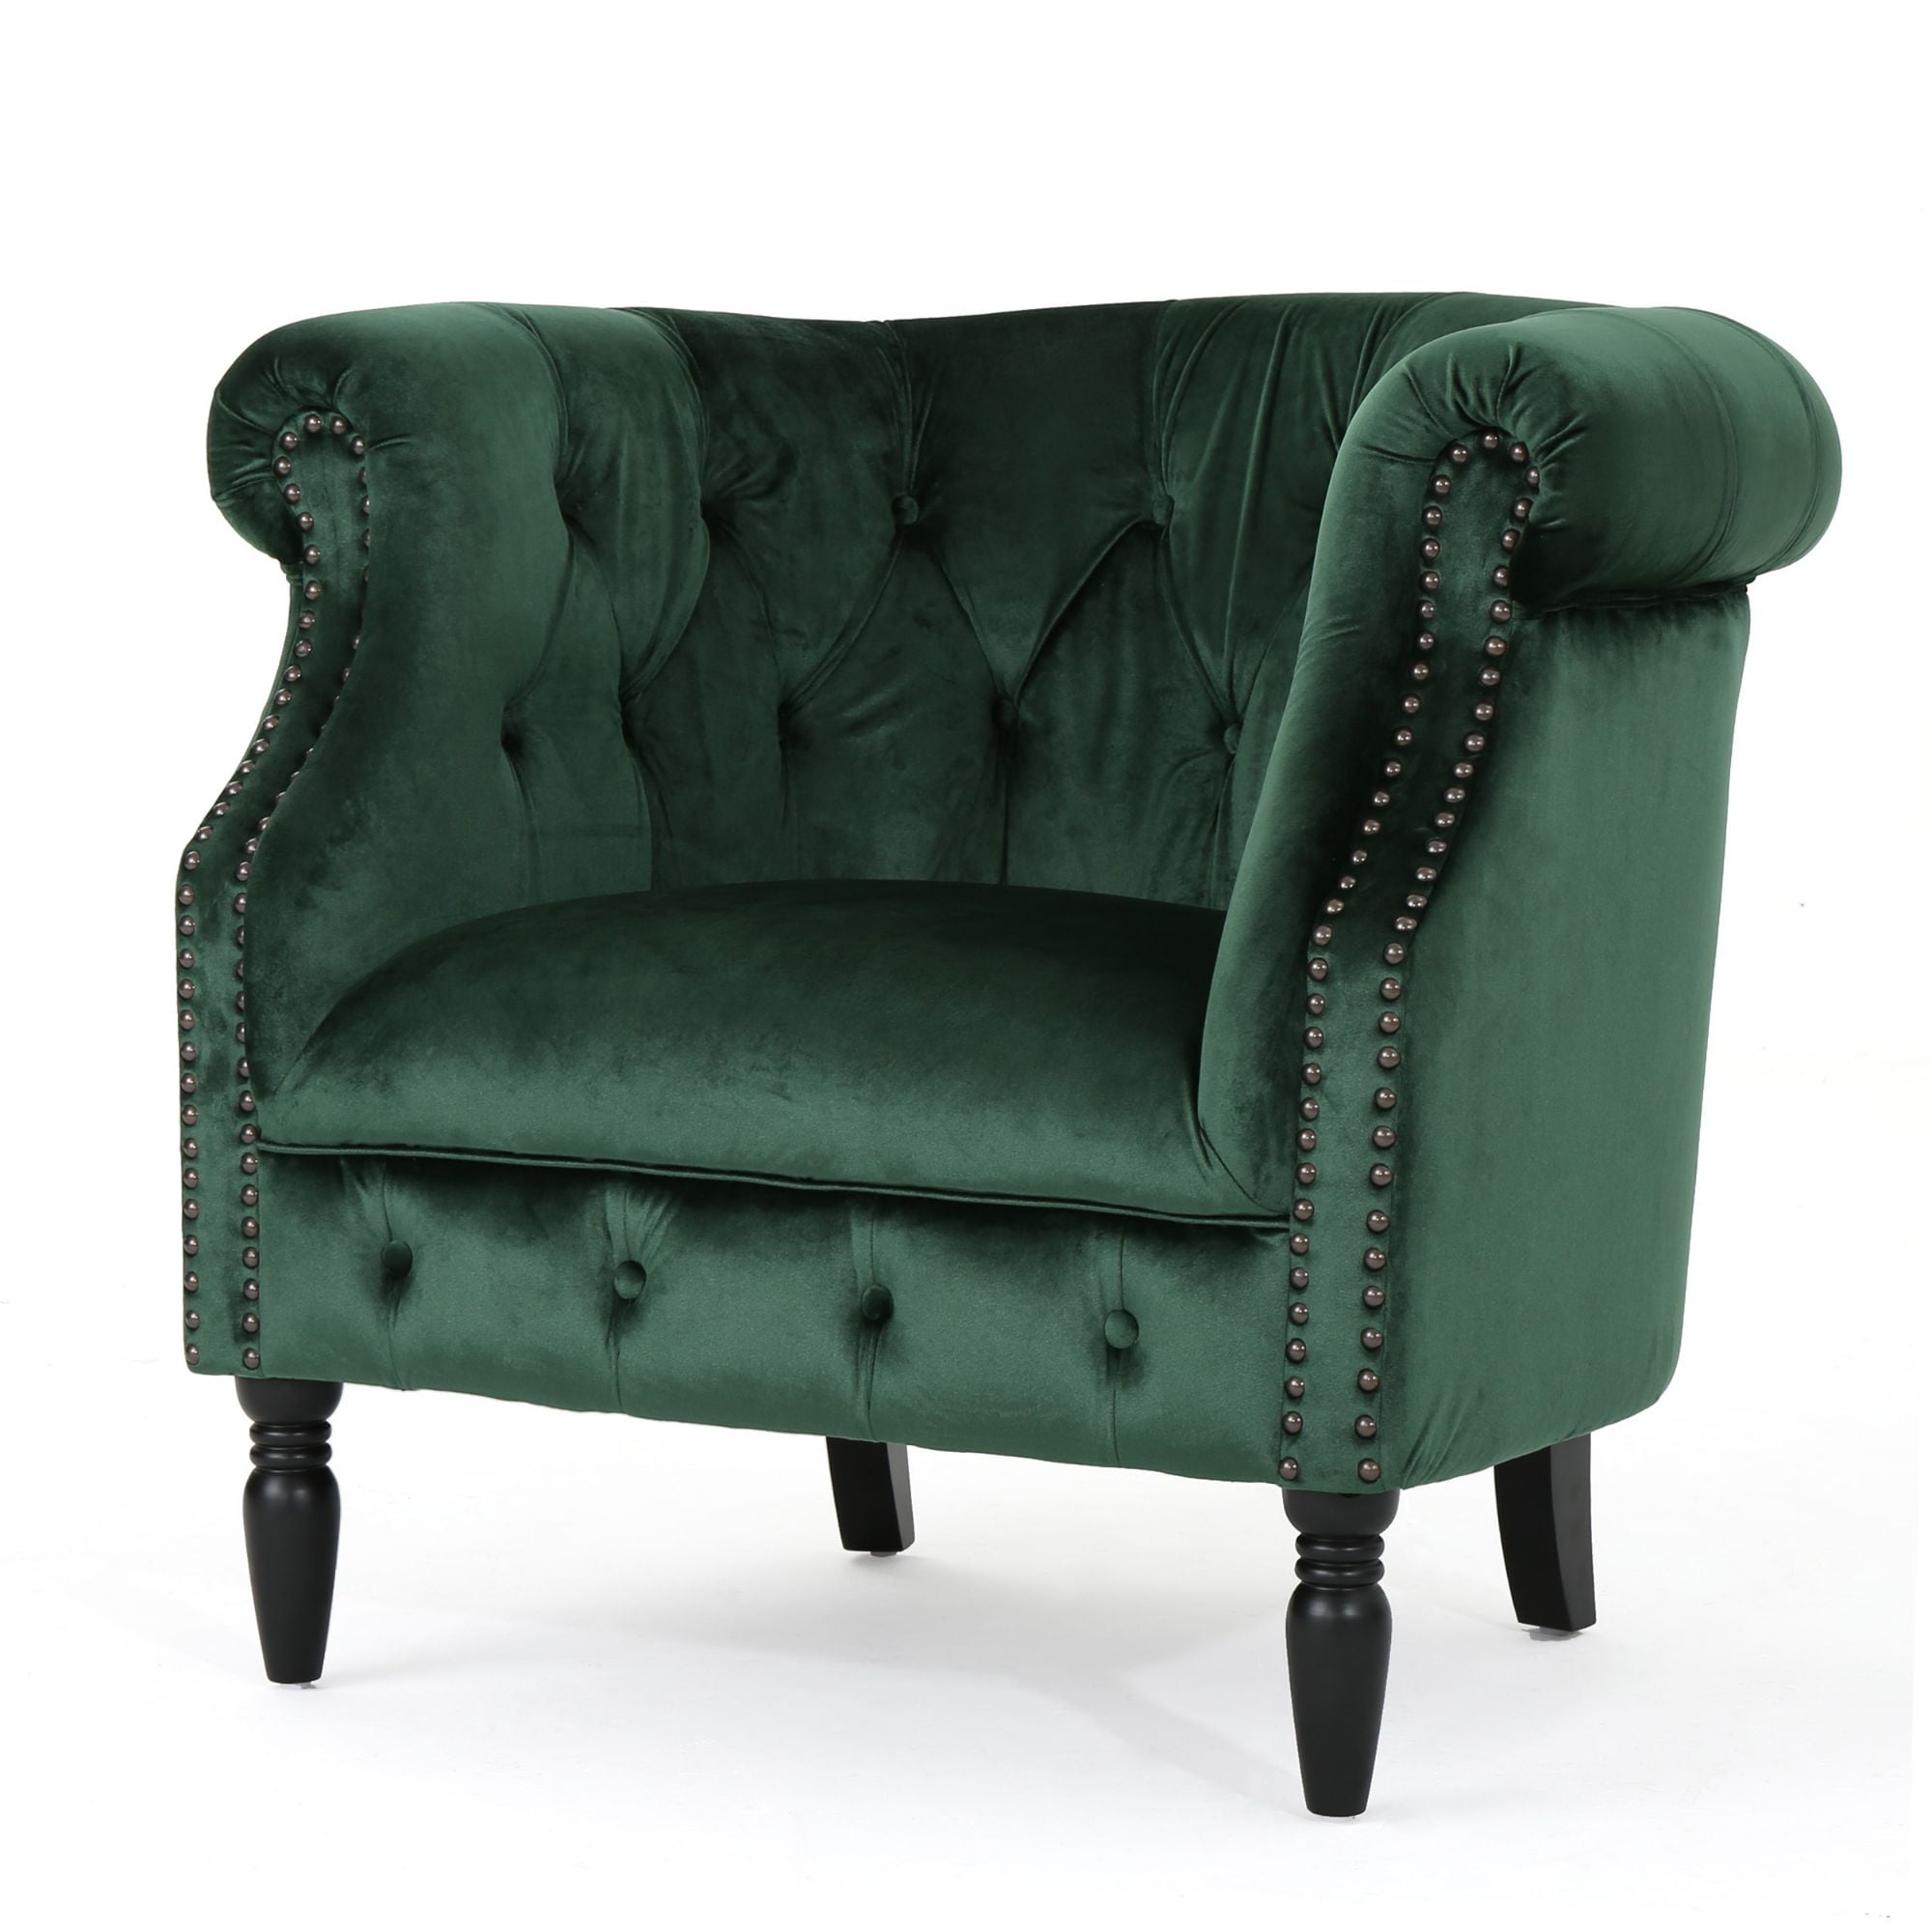 33" Emerald Green and Black Contemporary Tufted Club Chair